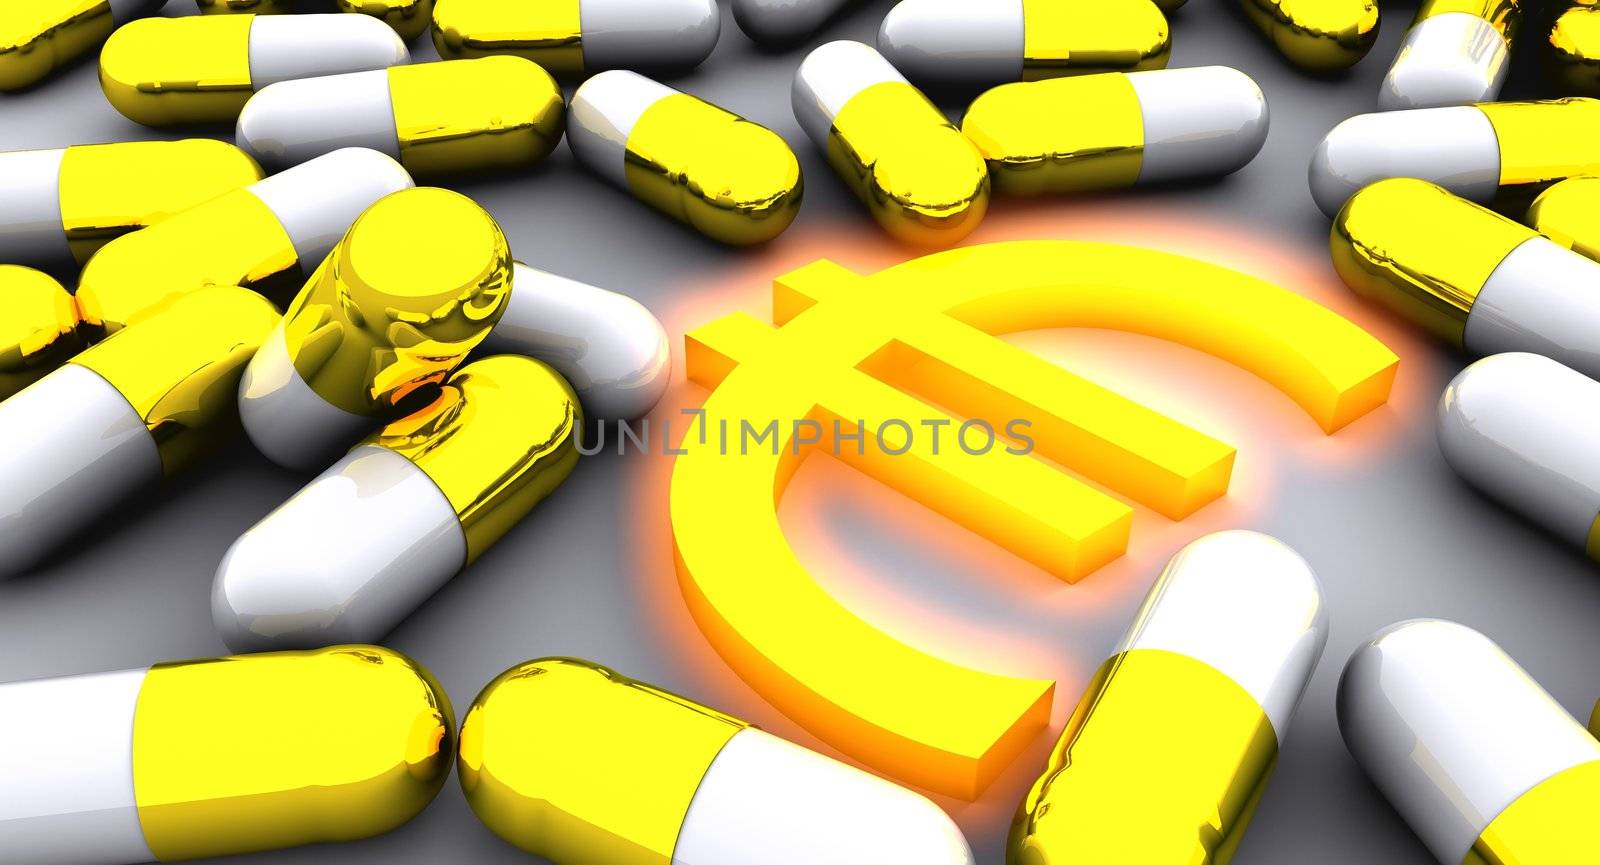 Concept of many golden pills and glowing golden Euro symbol rendered on white background. Concept should be symbolizing treatment of complicated economical situation in Eurozone. Additionally it can be symbolizing highly valuable cure or expensive health care.